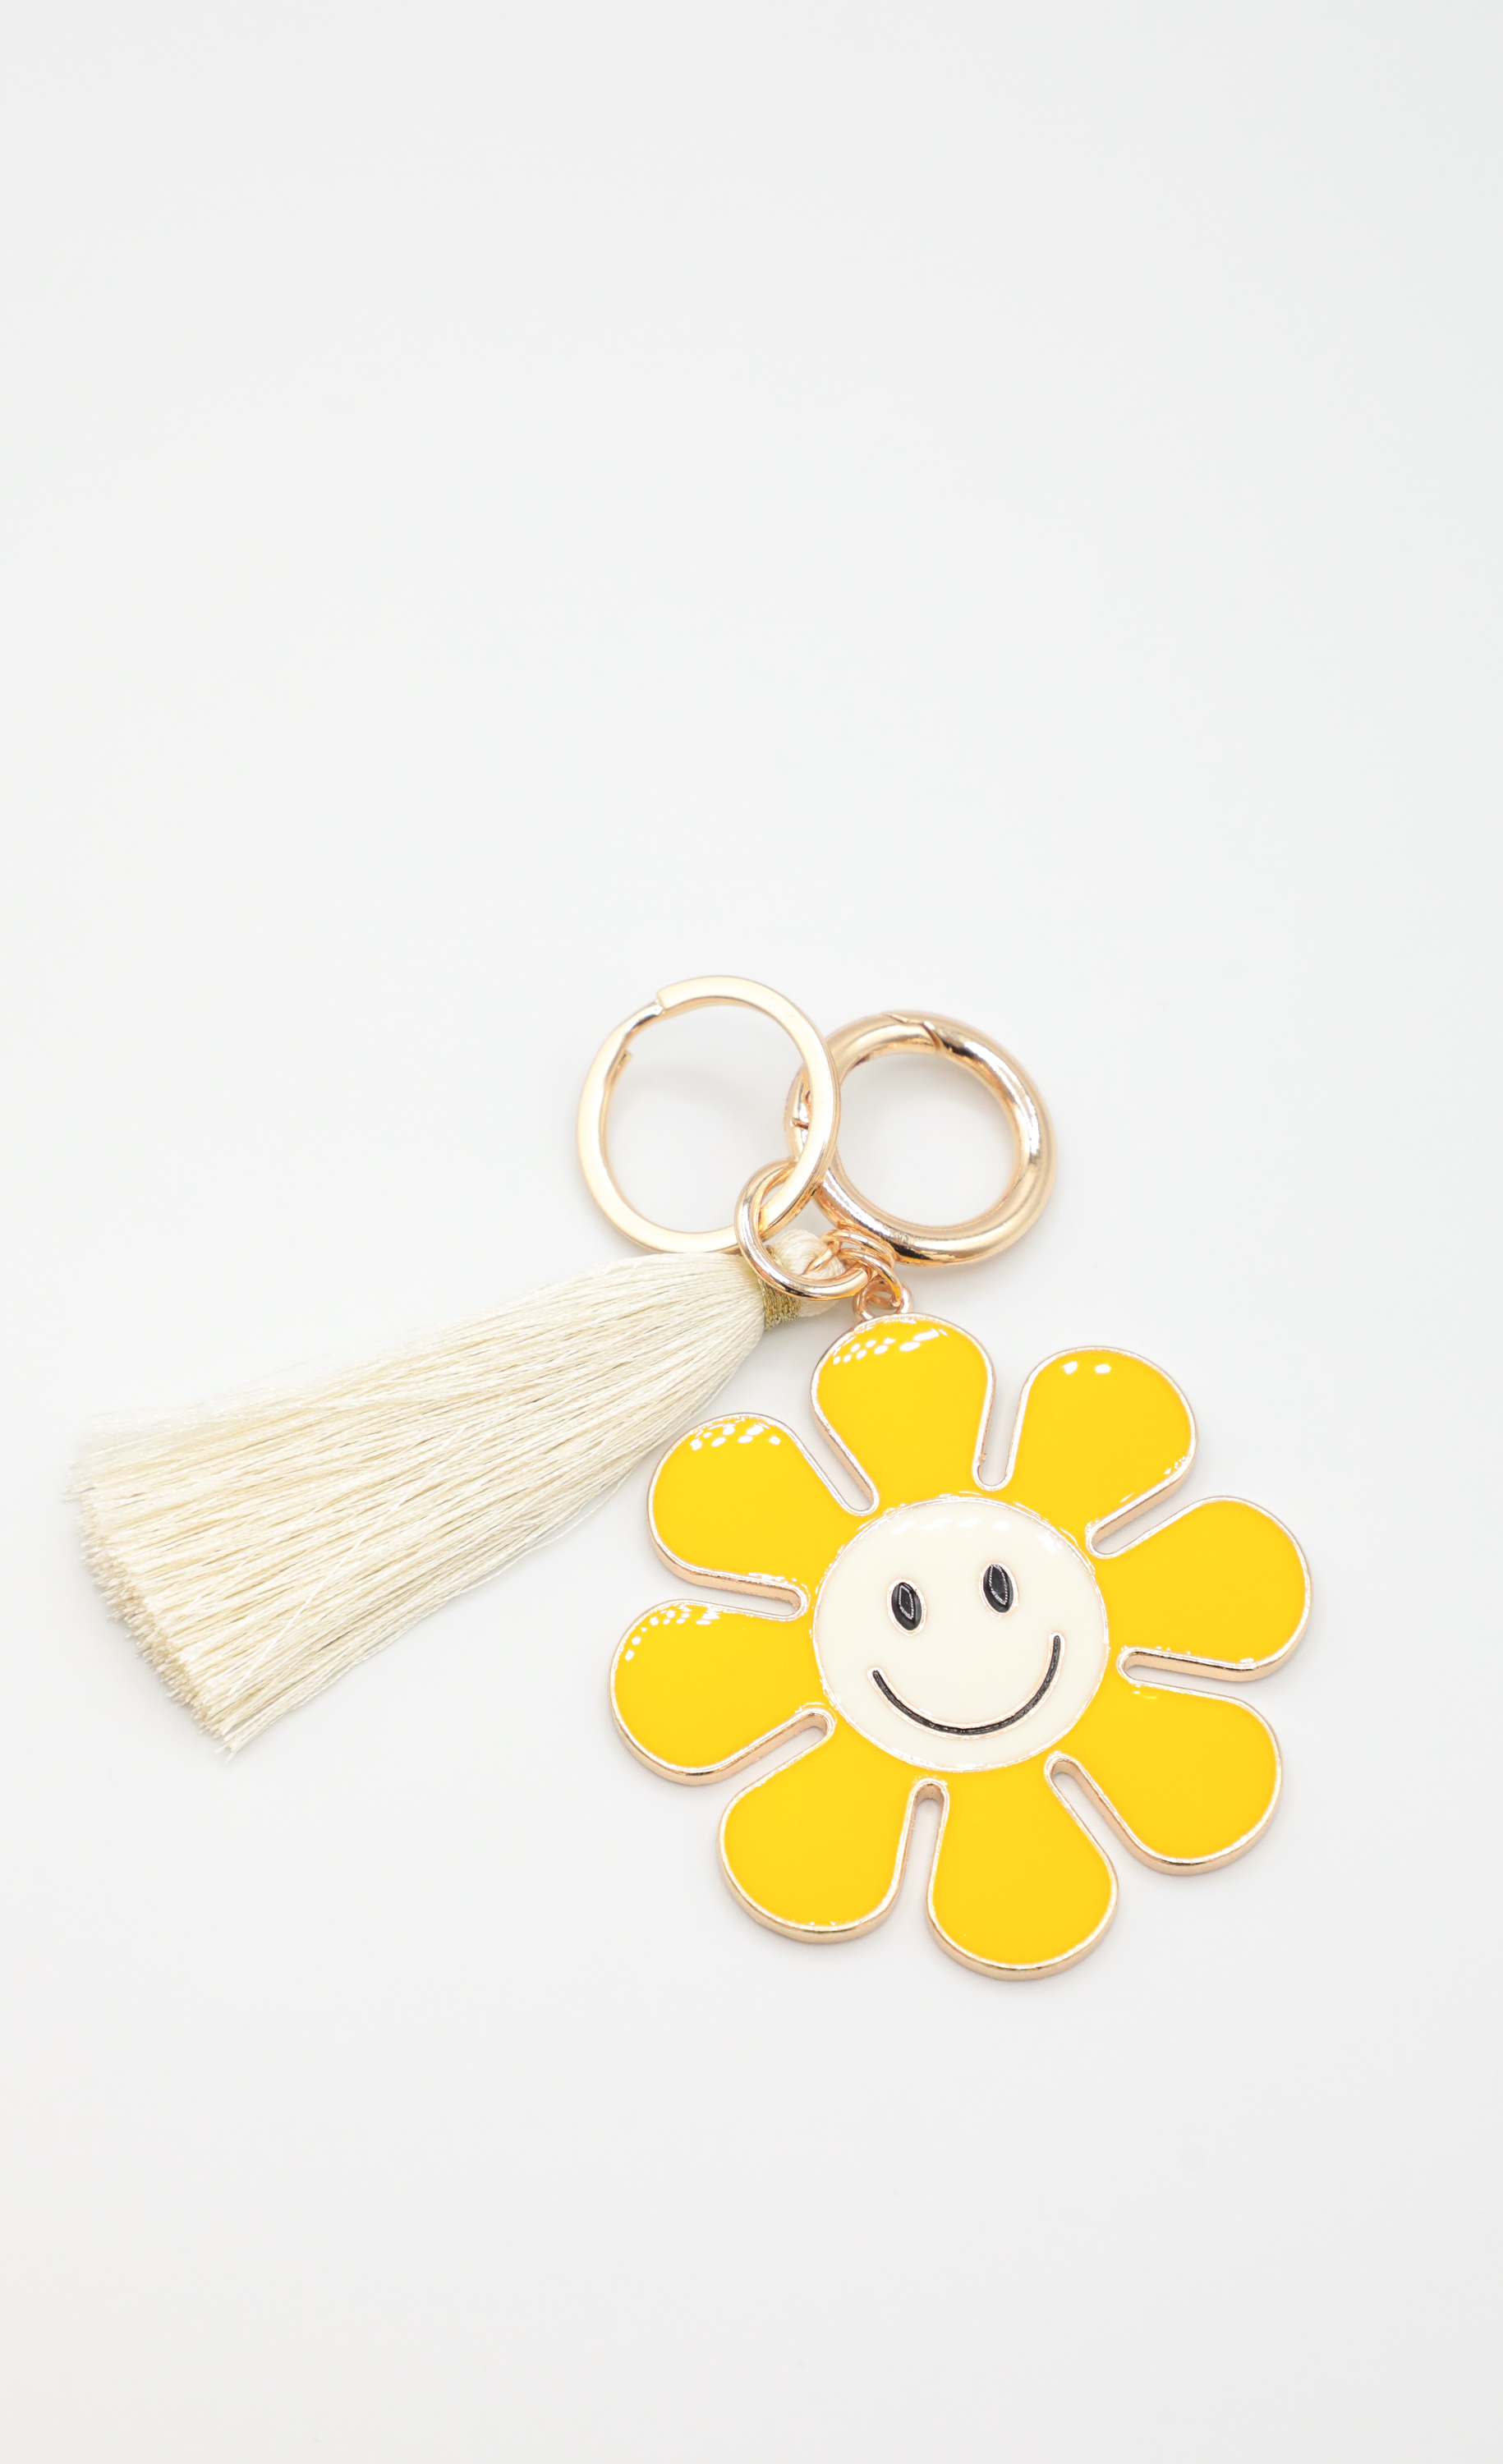 Miles of Smiles Keychain in Yellow and White